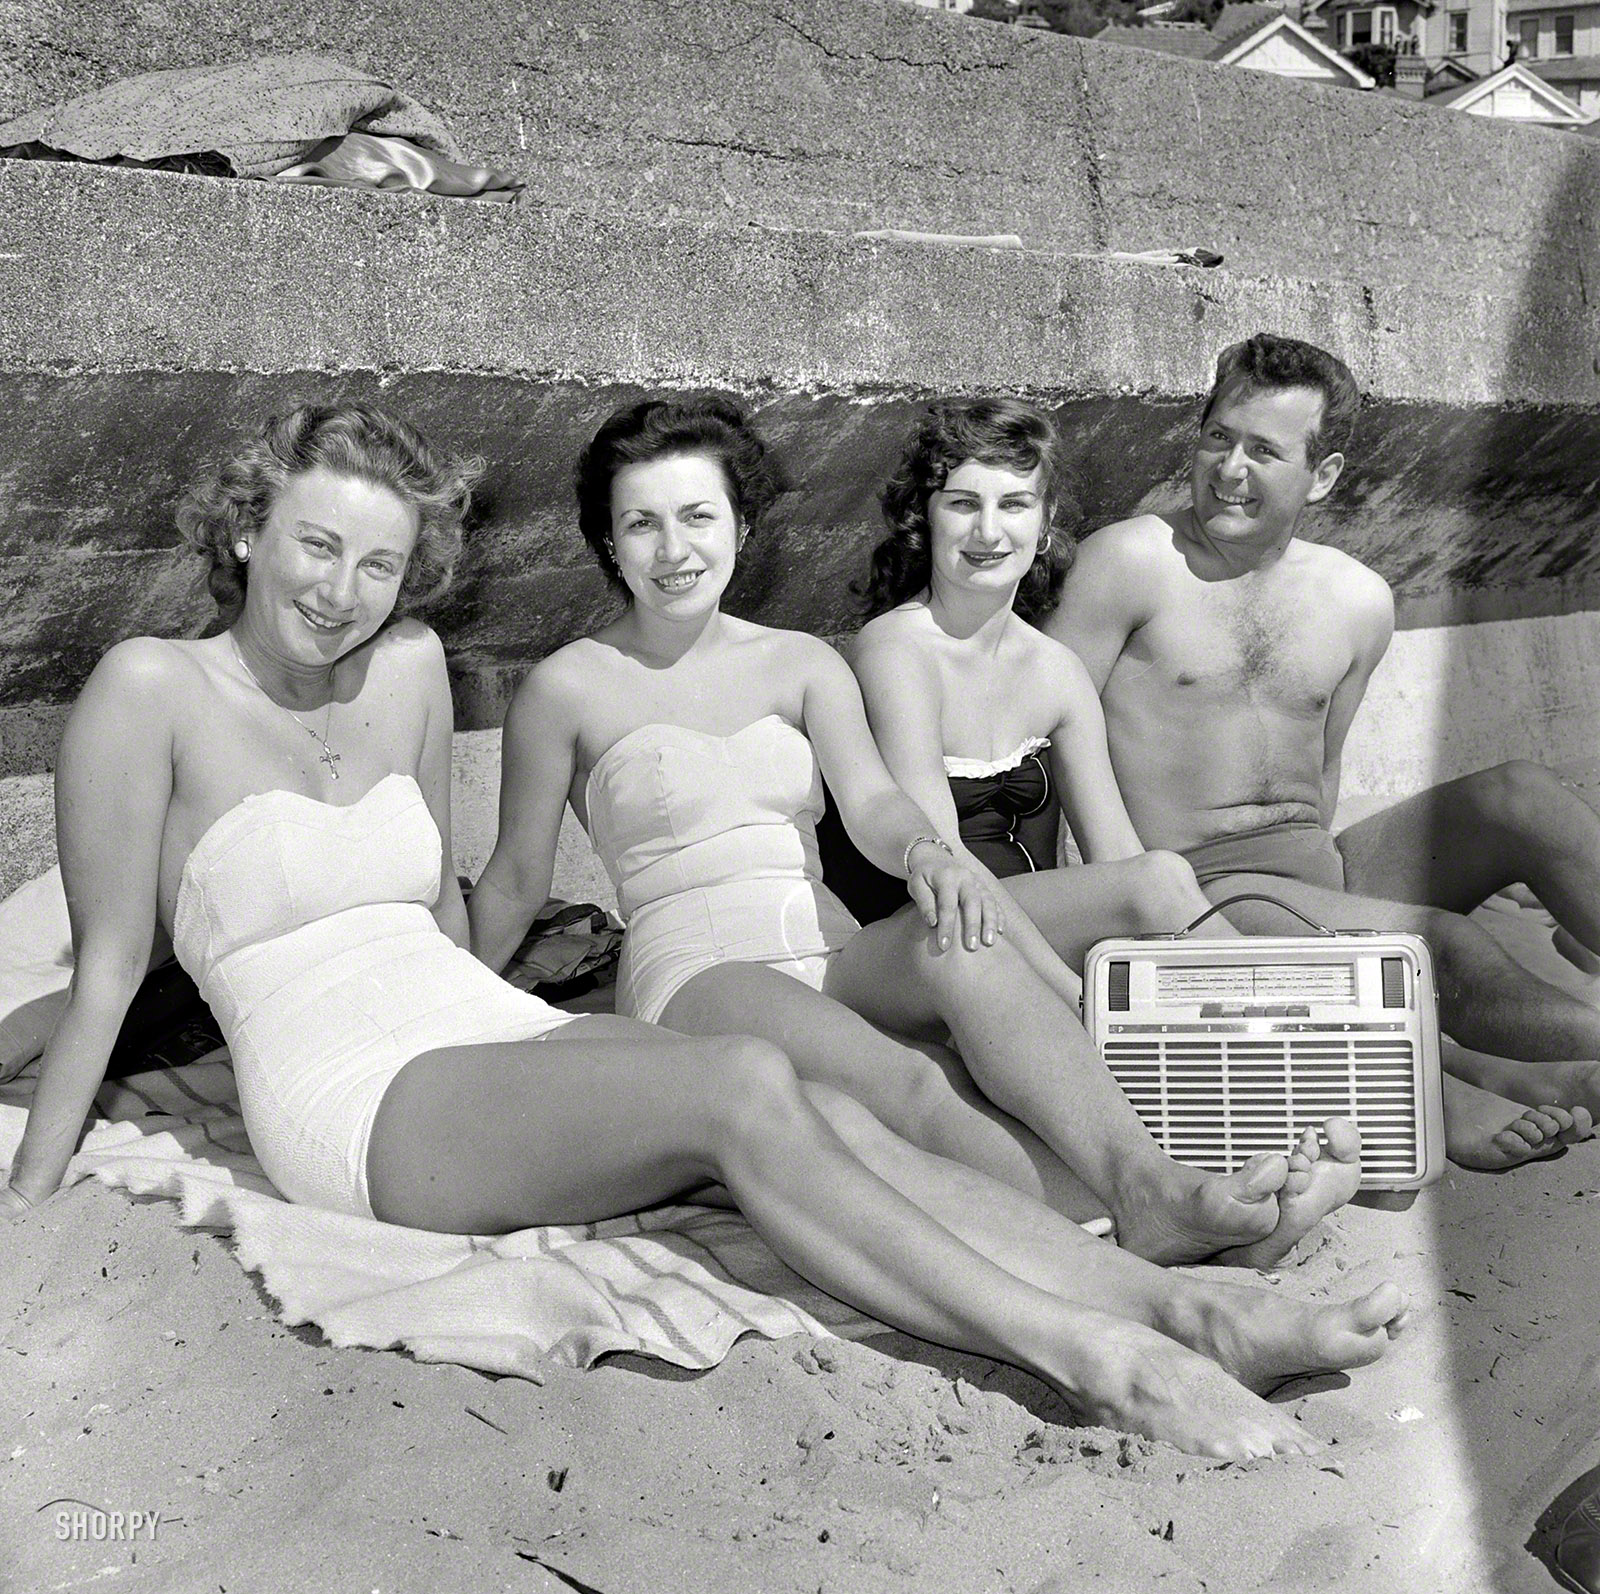 1958. "Swimmers listening to radio and relaxing at Oriental Bay Beach, Wellington, New Zealand." Evening Post photo archive. View full size.